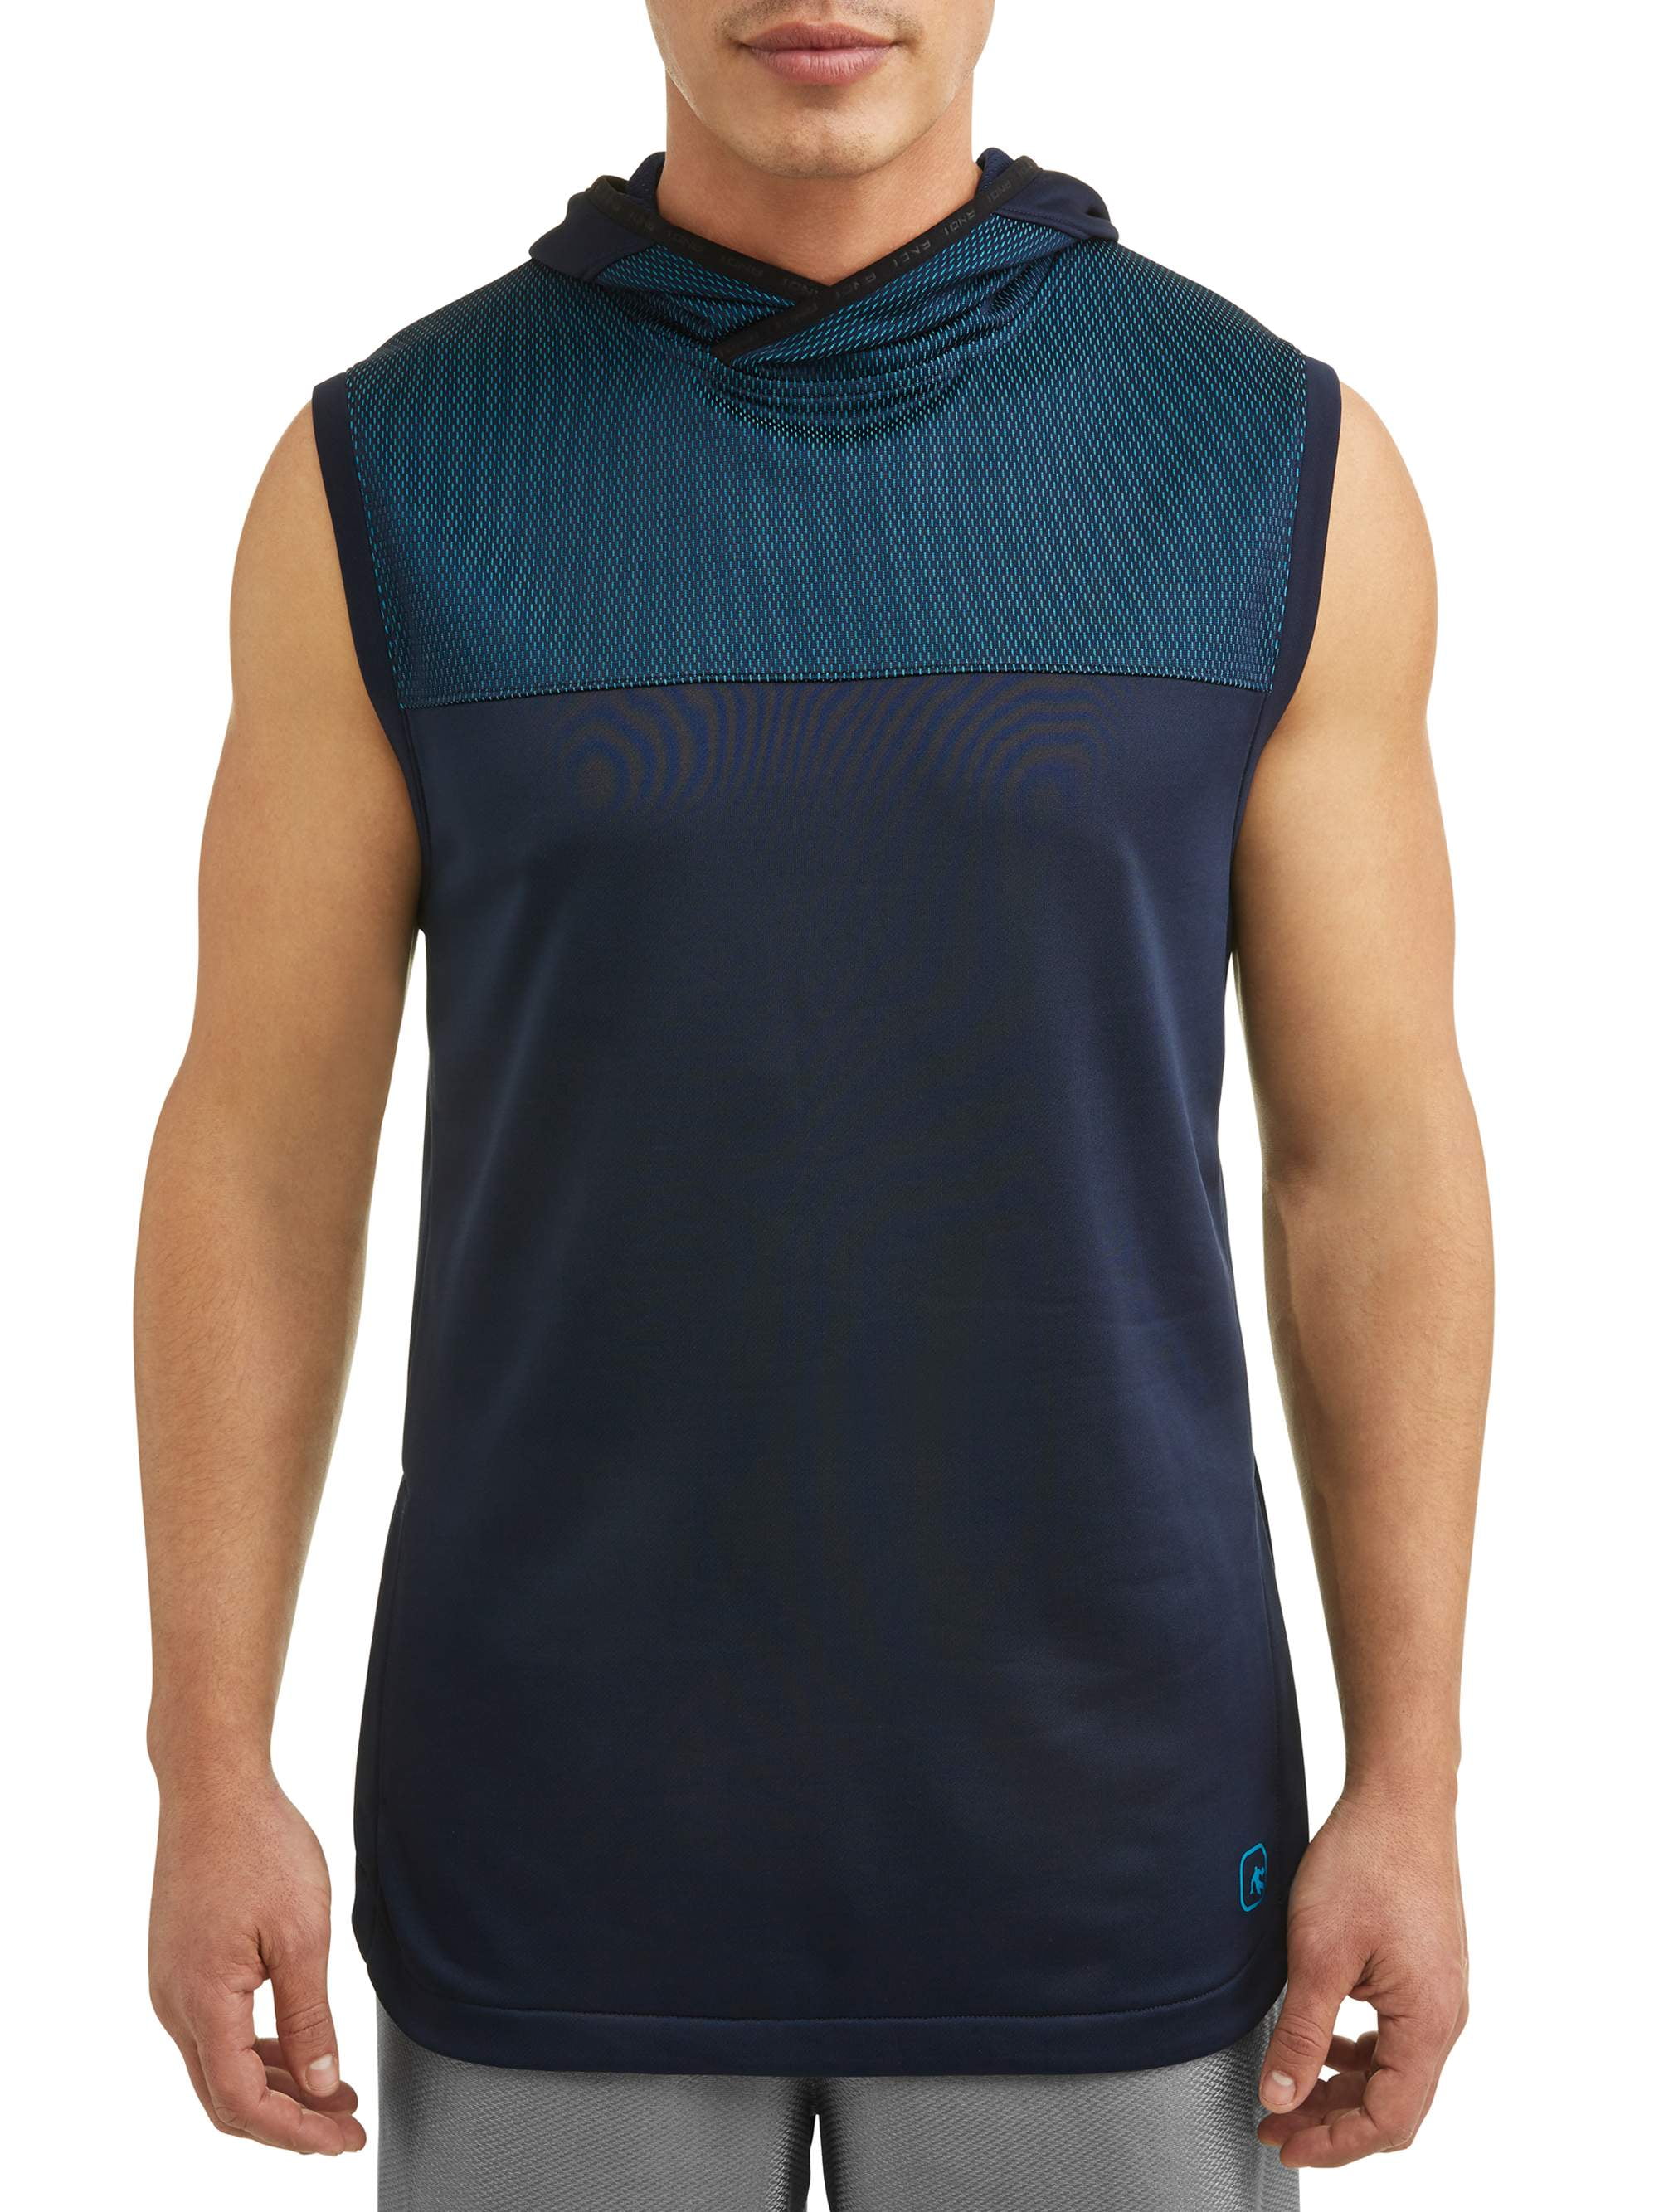 AND1 Men's French Terry Sleeveless Hoodie - Walmart.com